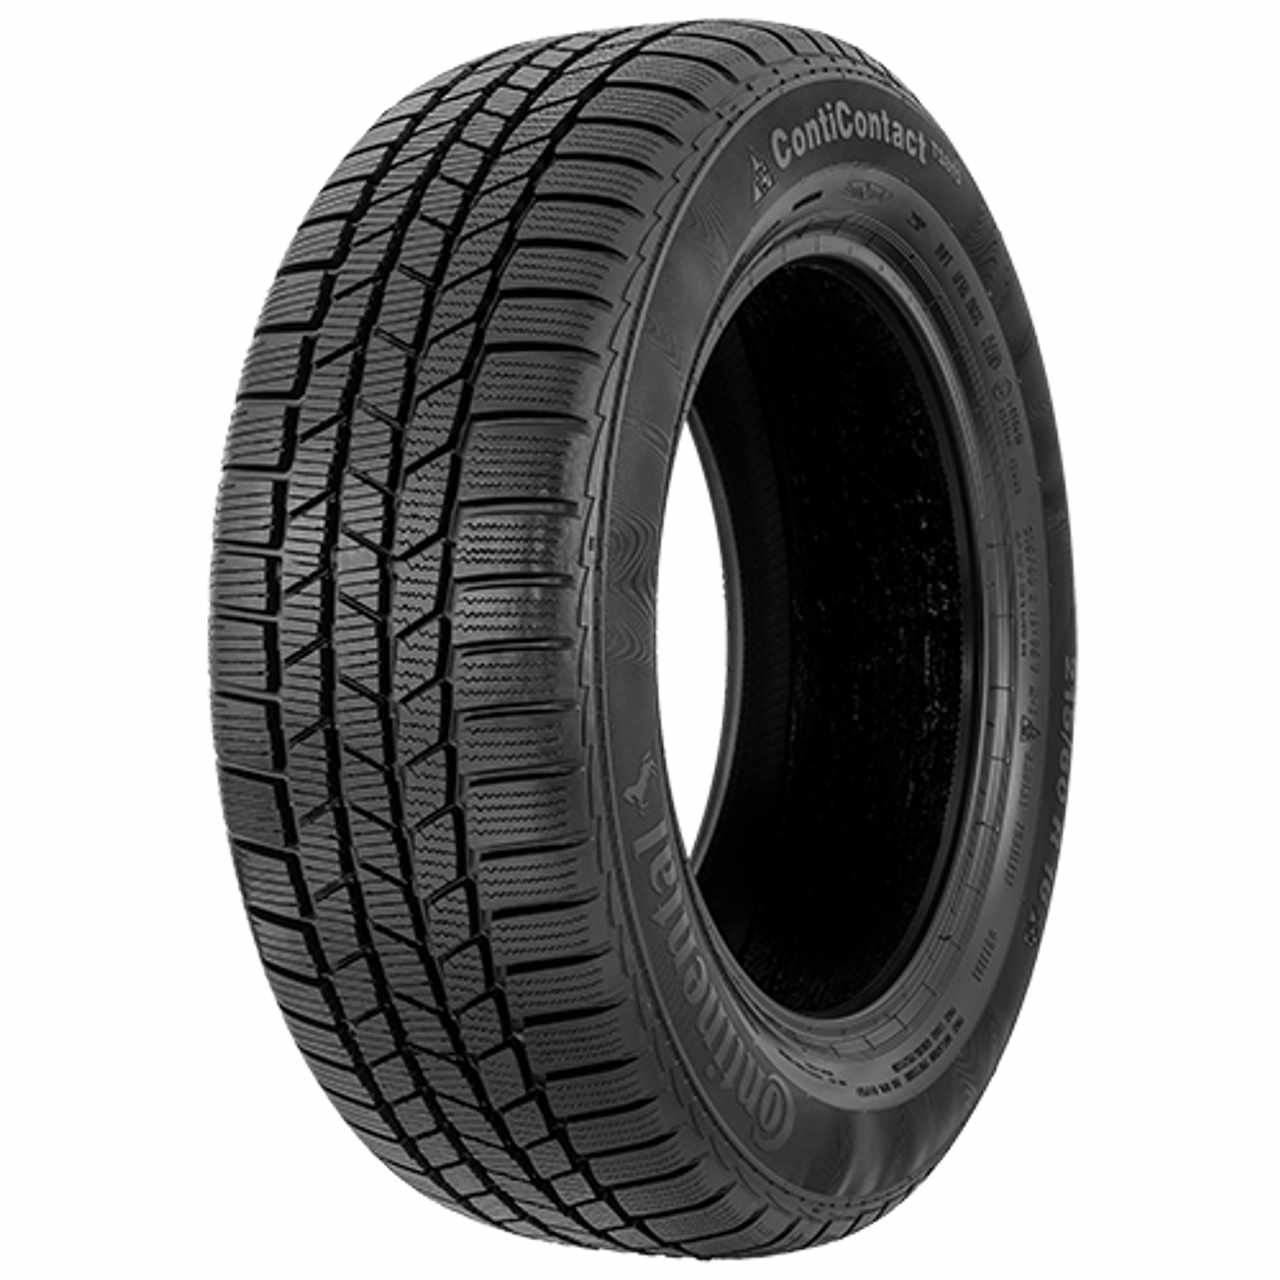 CONTINENTAL CONTICONTACT TS 815 (VW) 205/60R16 96V BSW